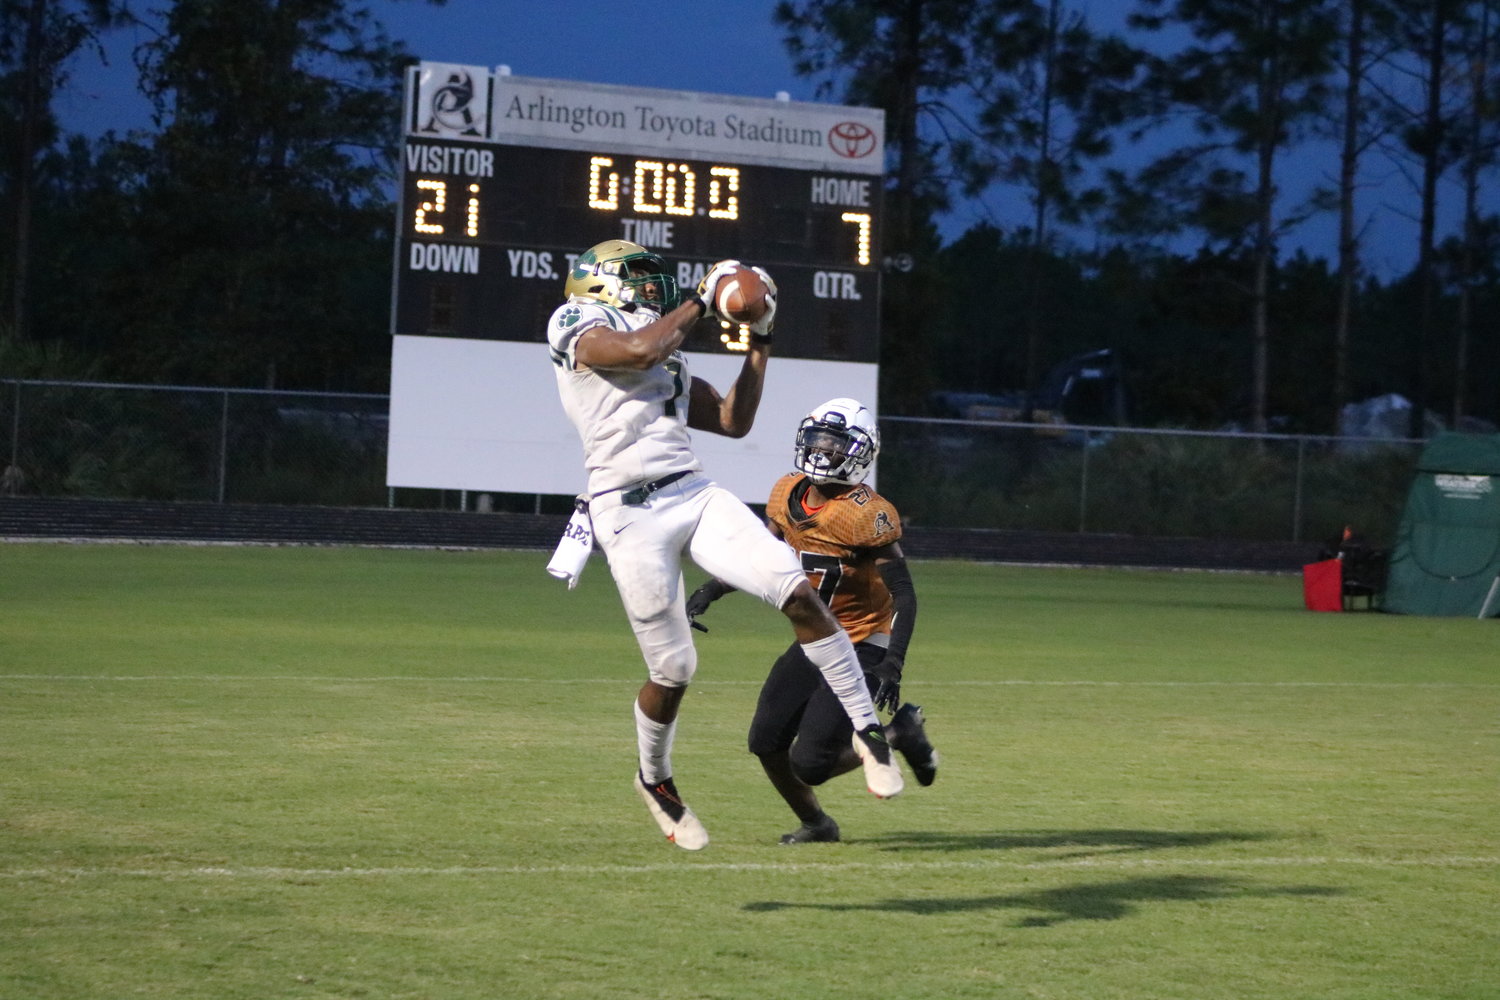 Senior receiver Dom Henry has been a focal point of the Nease offense all season. He has 1,114 receiving yards and nine touchdowns.